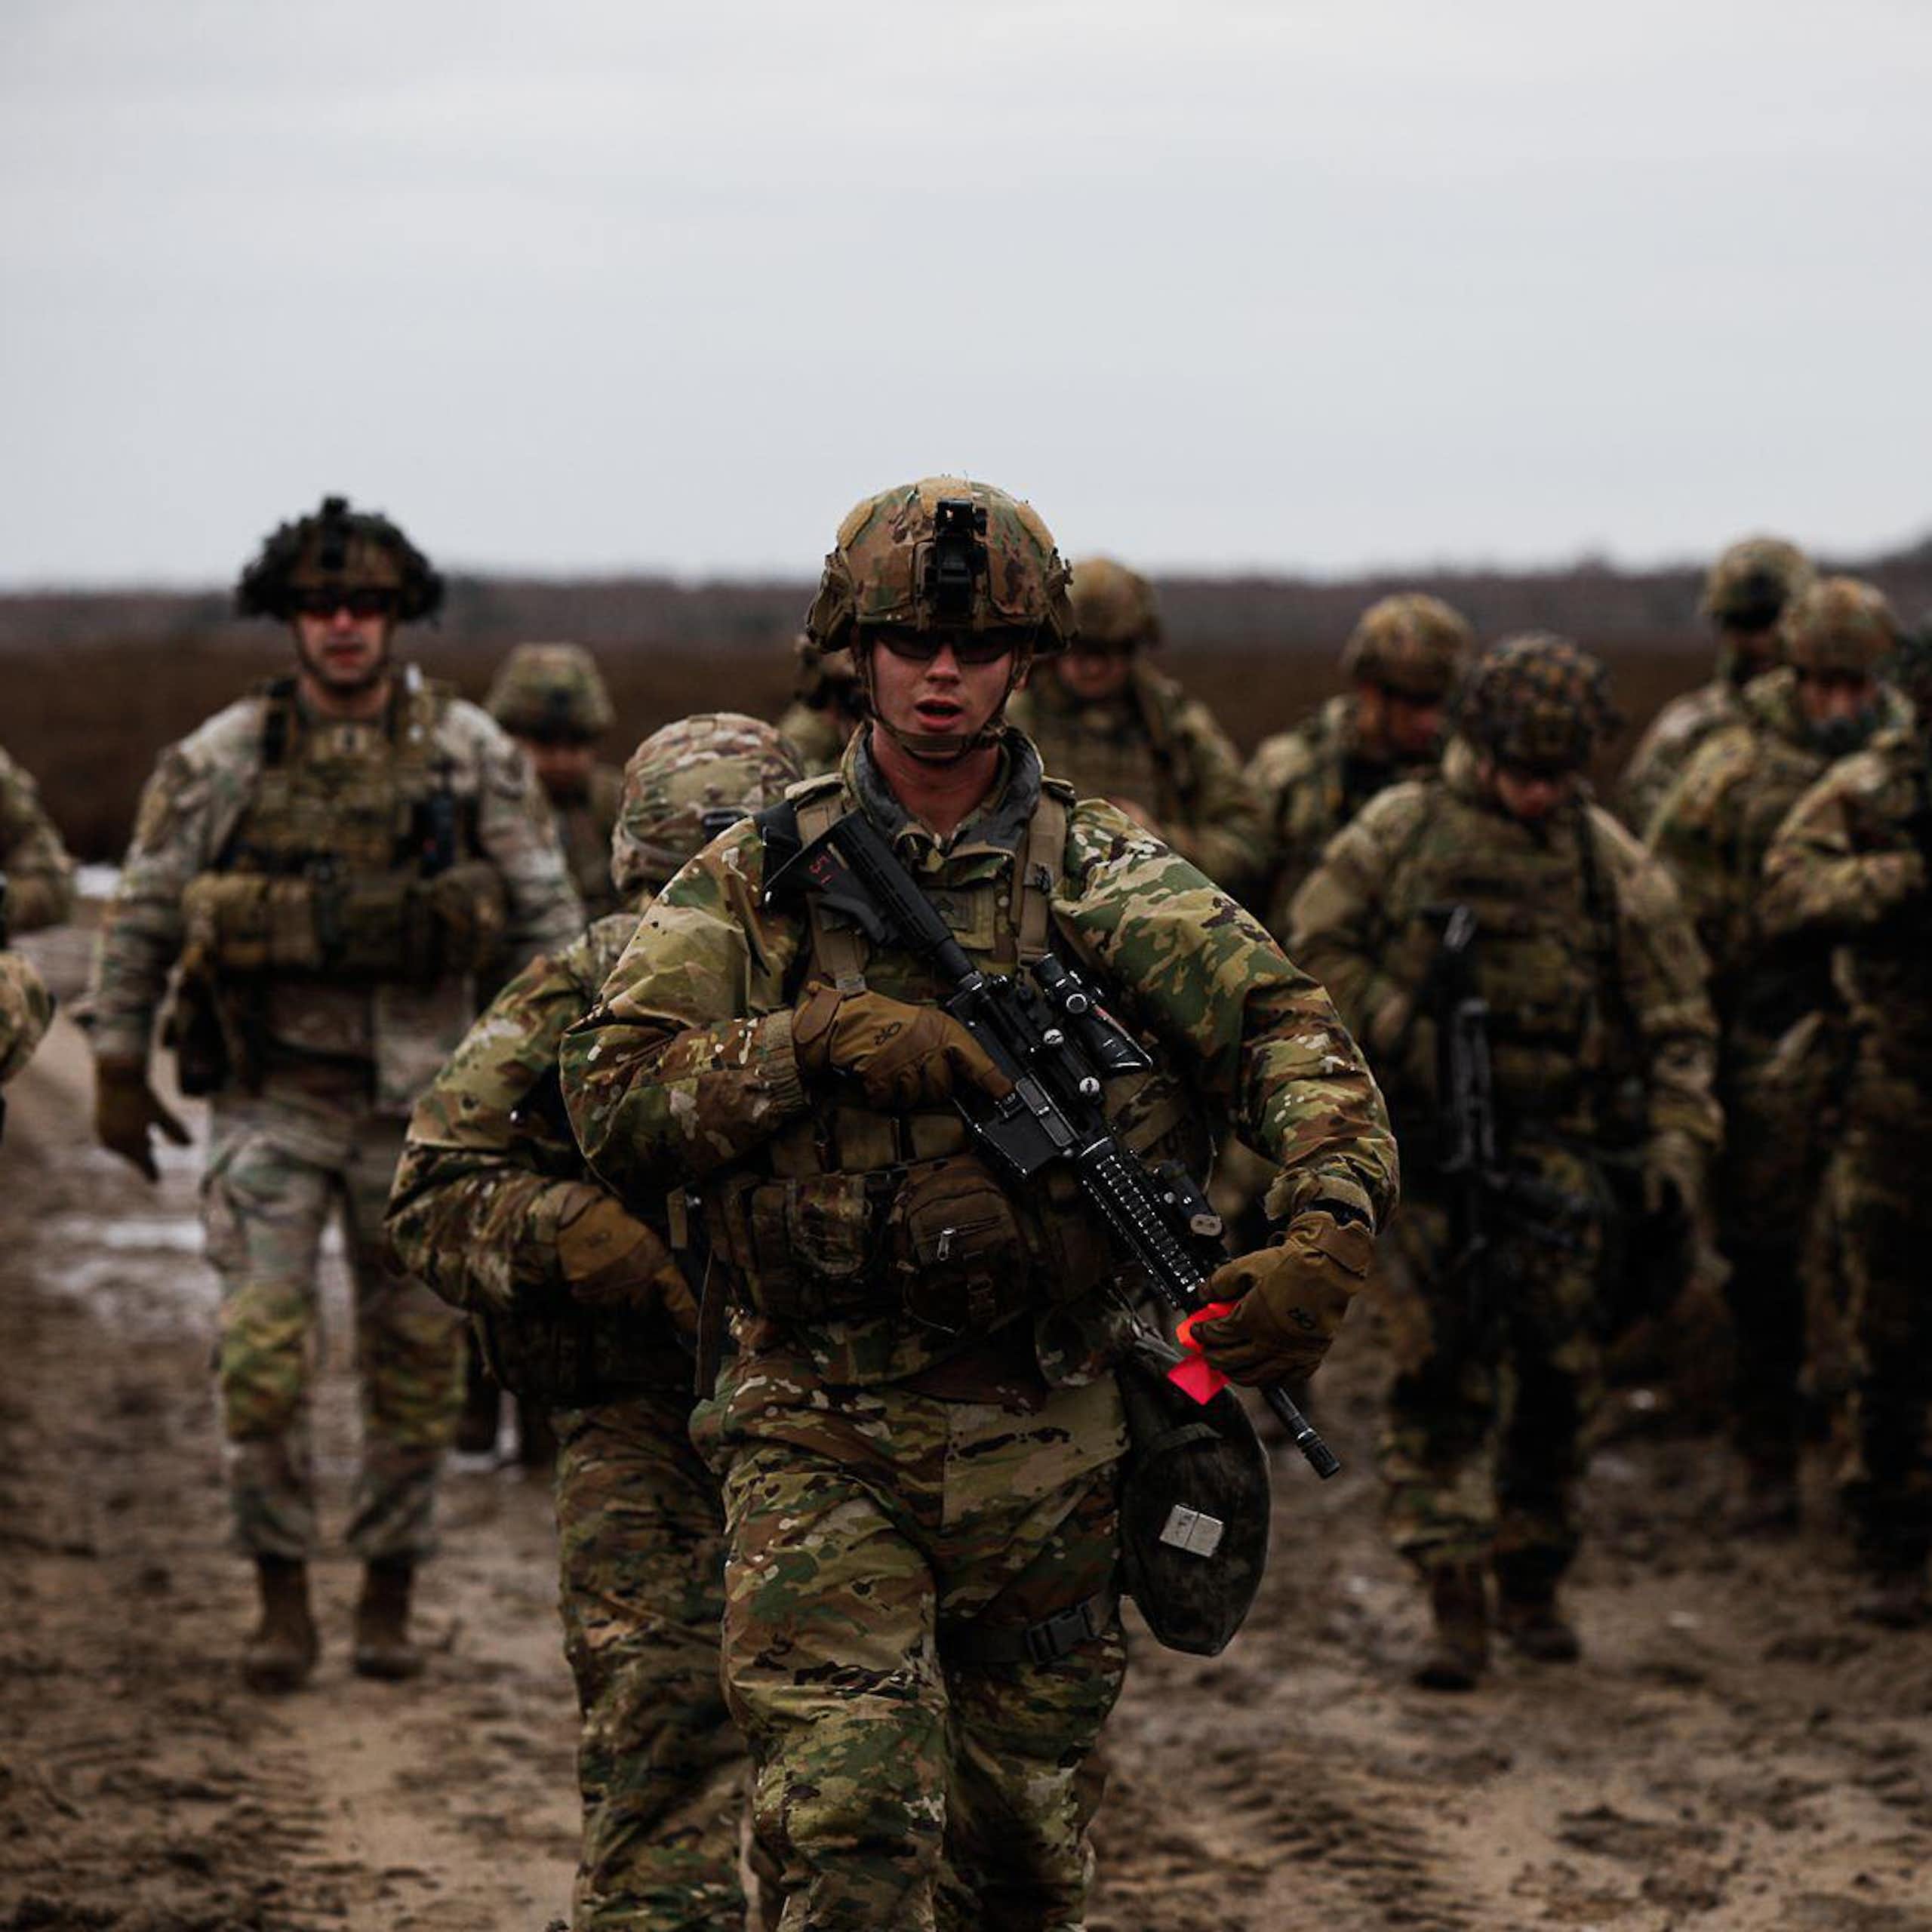 US soldiers running towards the camera.